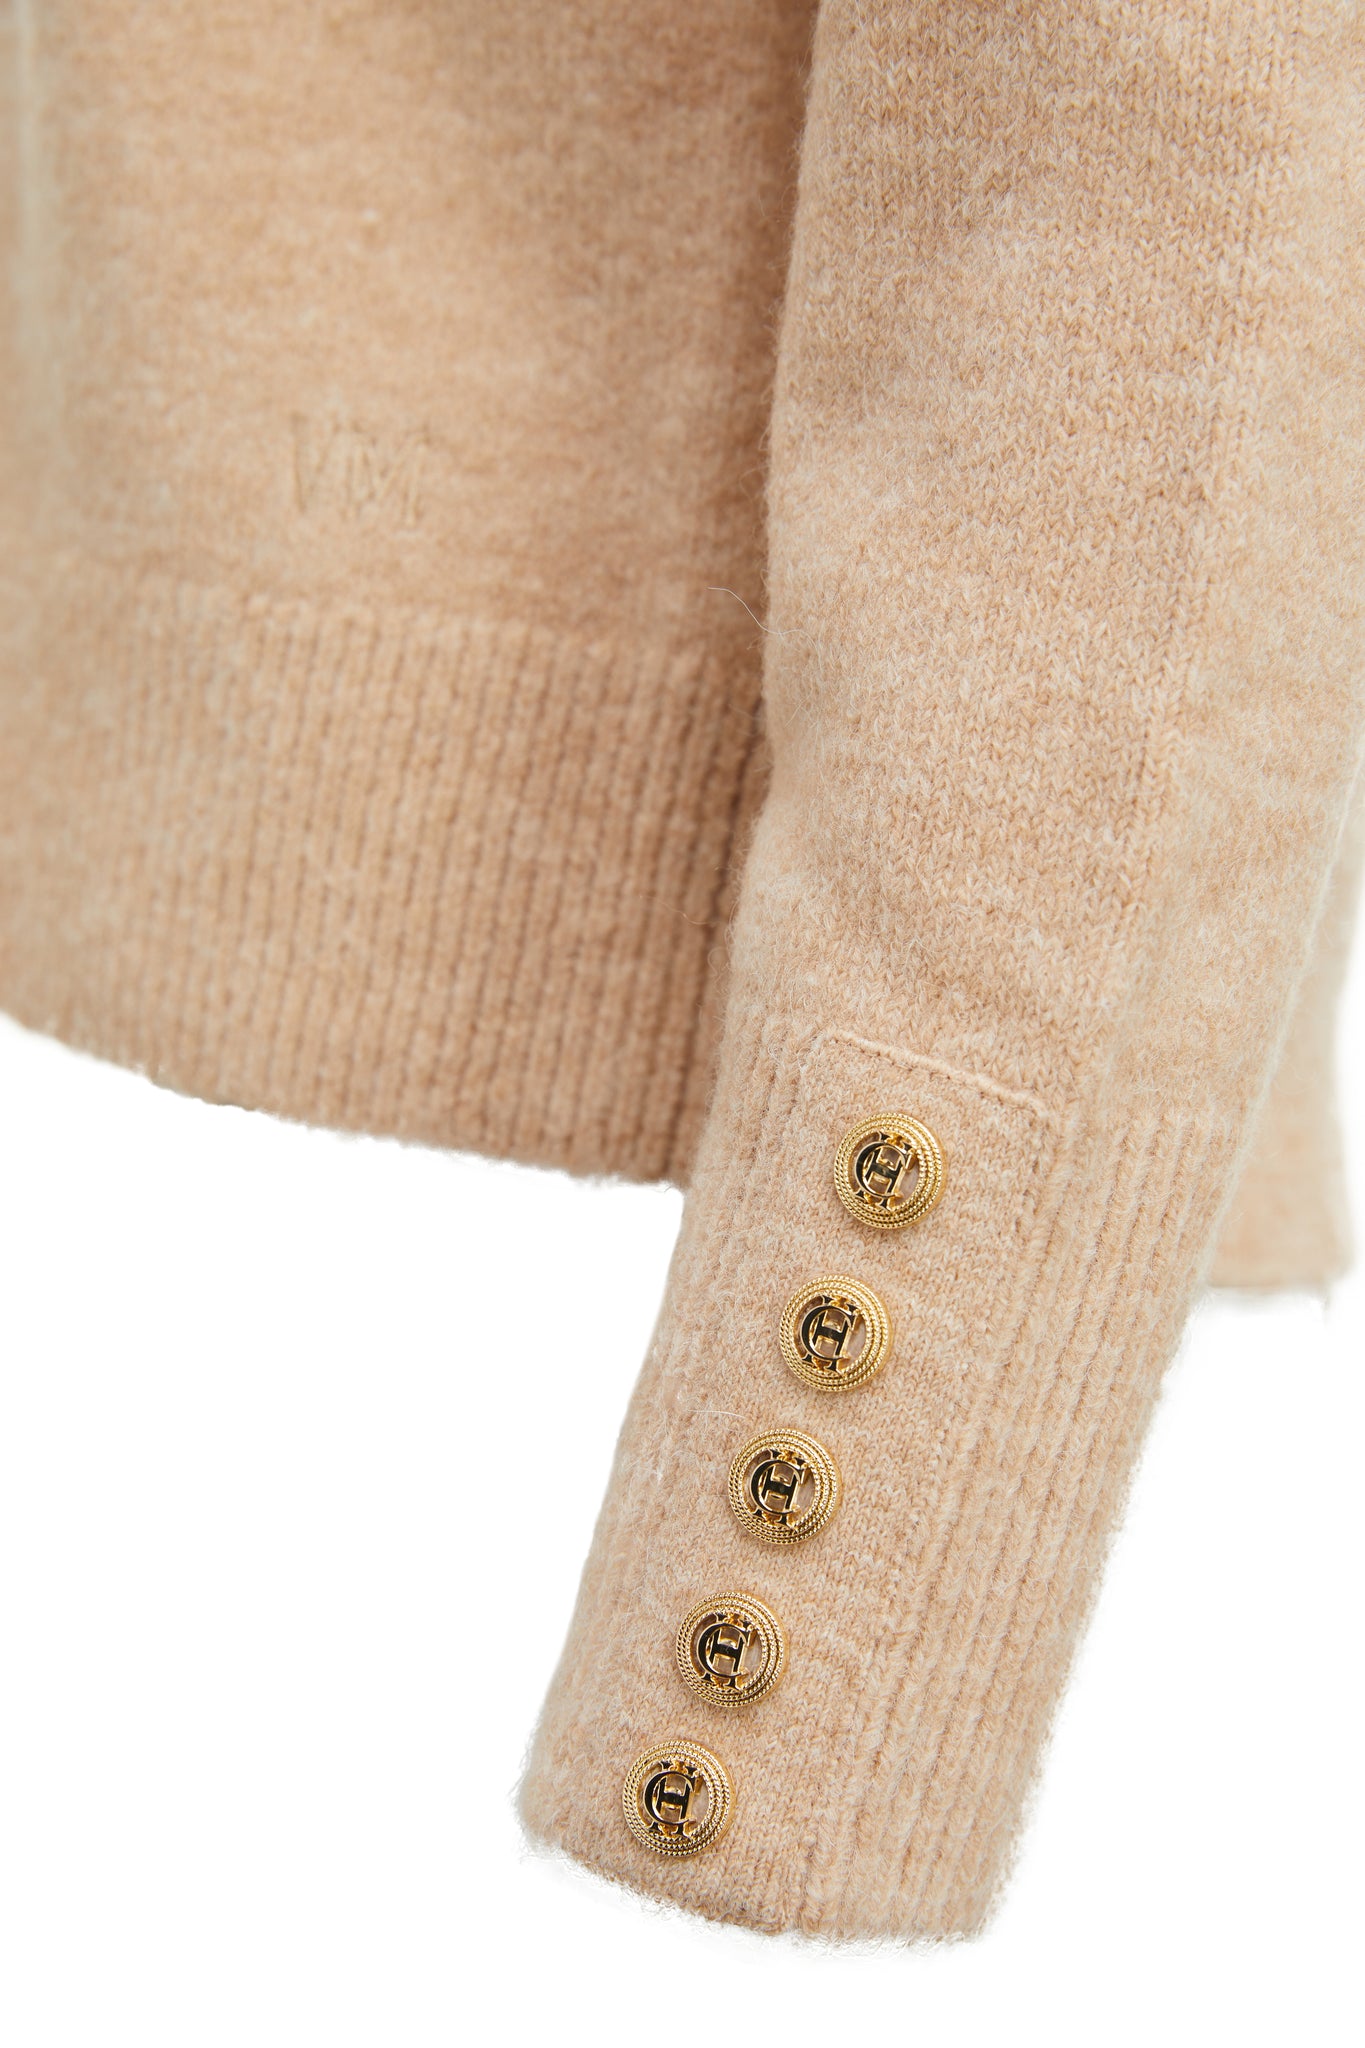 Gold button detail of womens lightweight  v neck knit in stone with gold button cuffs